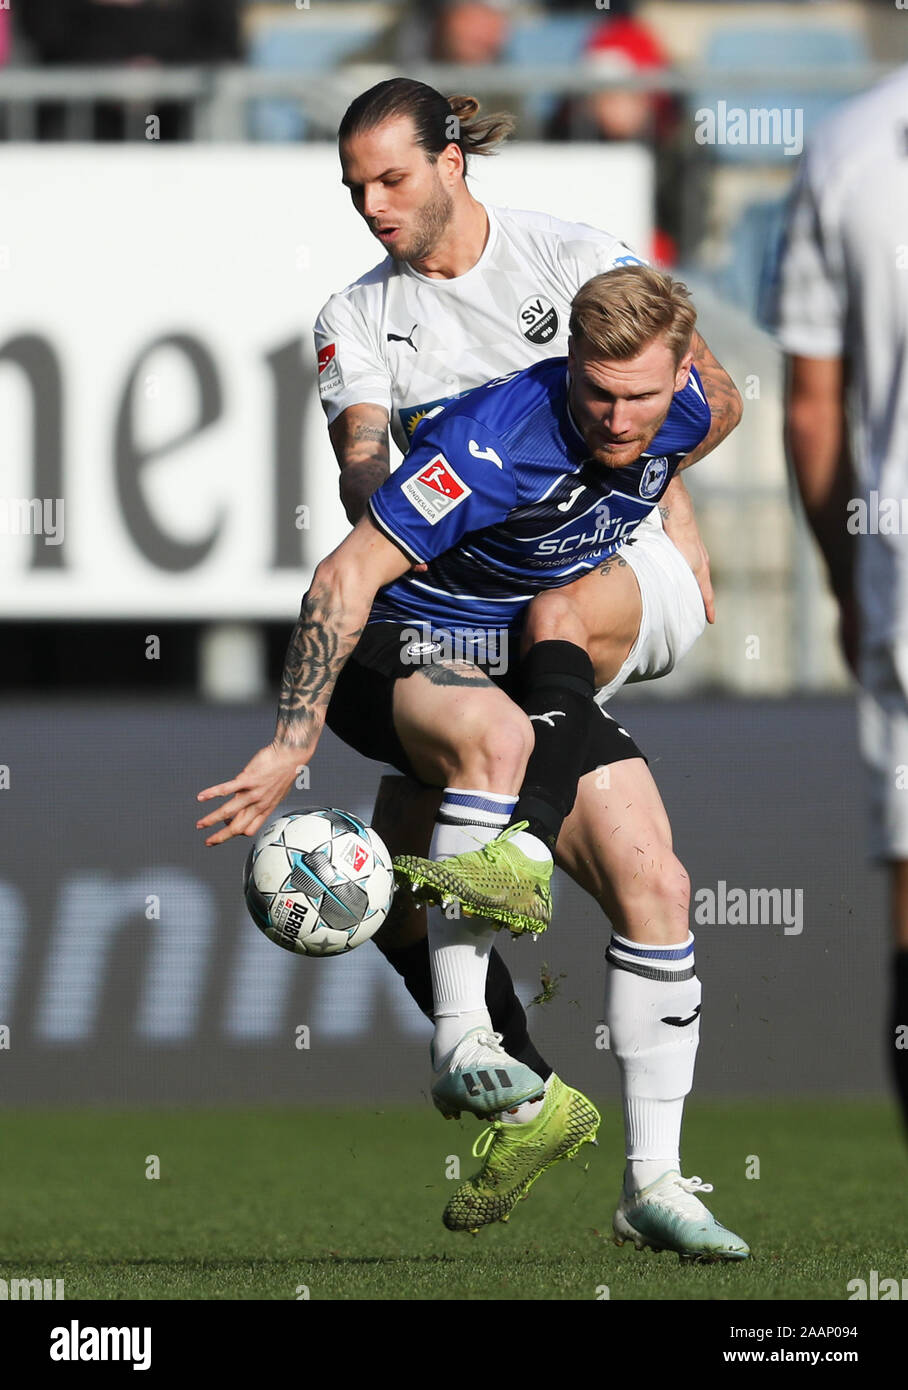 23 November 2019, North Rhine-Westphalia, Bielefeld: Soccer: 2nd Bundesliga, Arminia Bielefeld - SV Sandhausen, 14th matchday in the Schüco Arena. Bielefeld's Andreas Voglsammer (r) in the fight for the ball with Dennis Diekmeier (l) from Sandhausen. Photo: Friso Gentsch/dpa - IMPORTANT NOTE: In accordance with the requirements of the DFL Deutsche Fußball Liga or the DFB Deutscher Fußball-Bund, it is prohibited to use or have used photographs taken in the stadium and/or the match in the form of sequence images and/or video-like photo sequences. Stock Photo